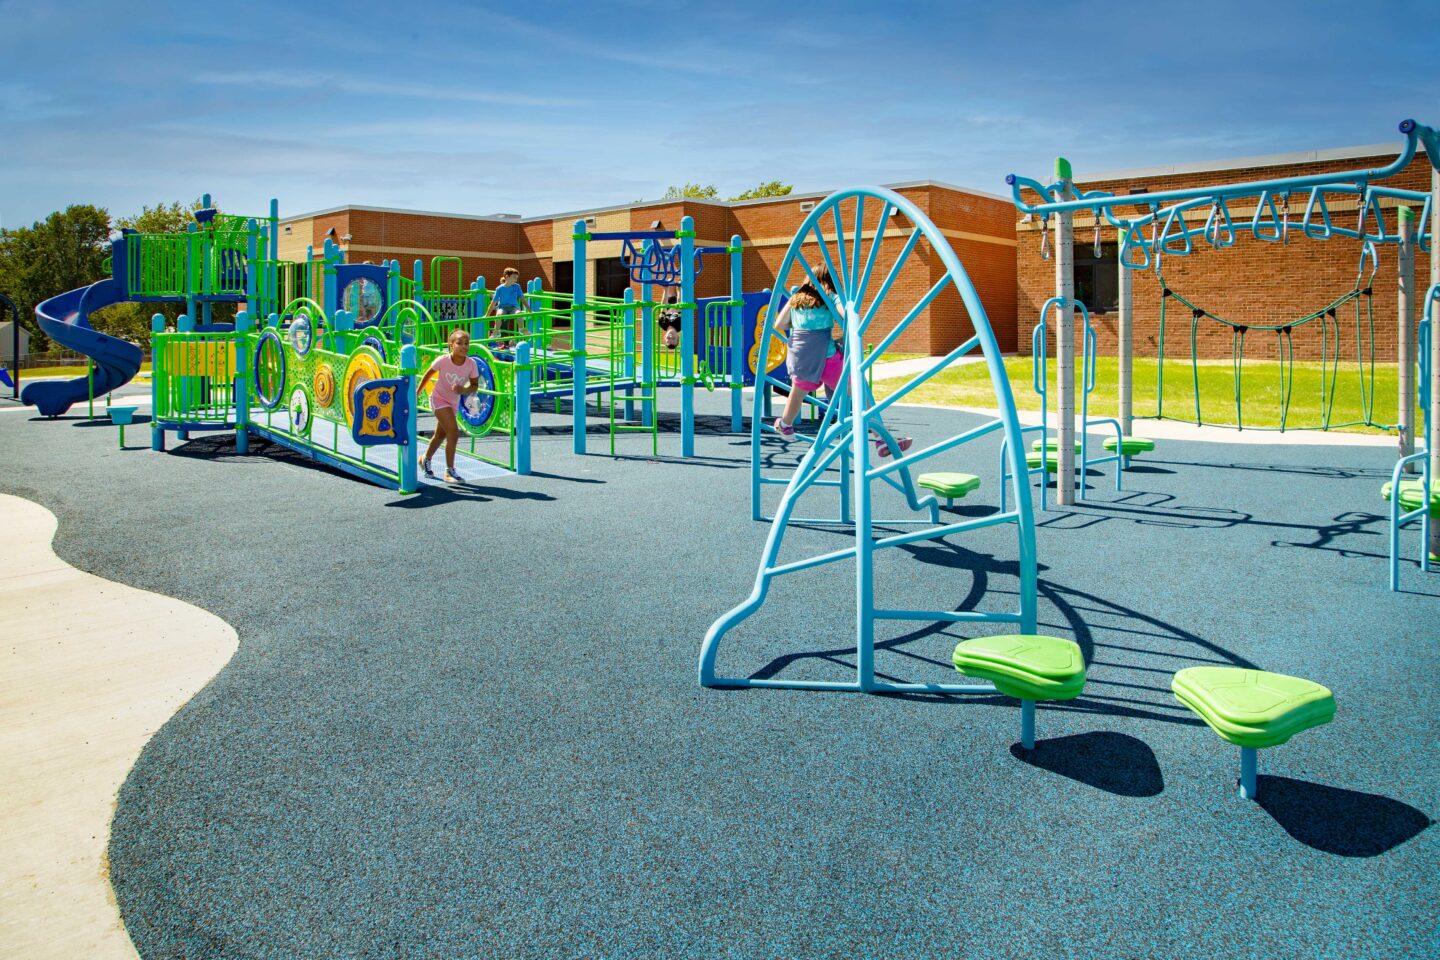 Herbert Hoover Elementary Playground with kids playing on the equipment